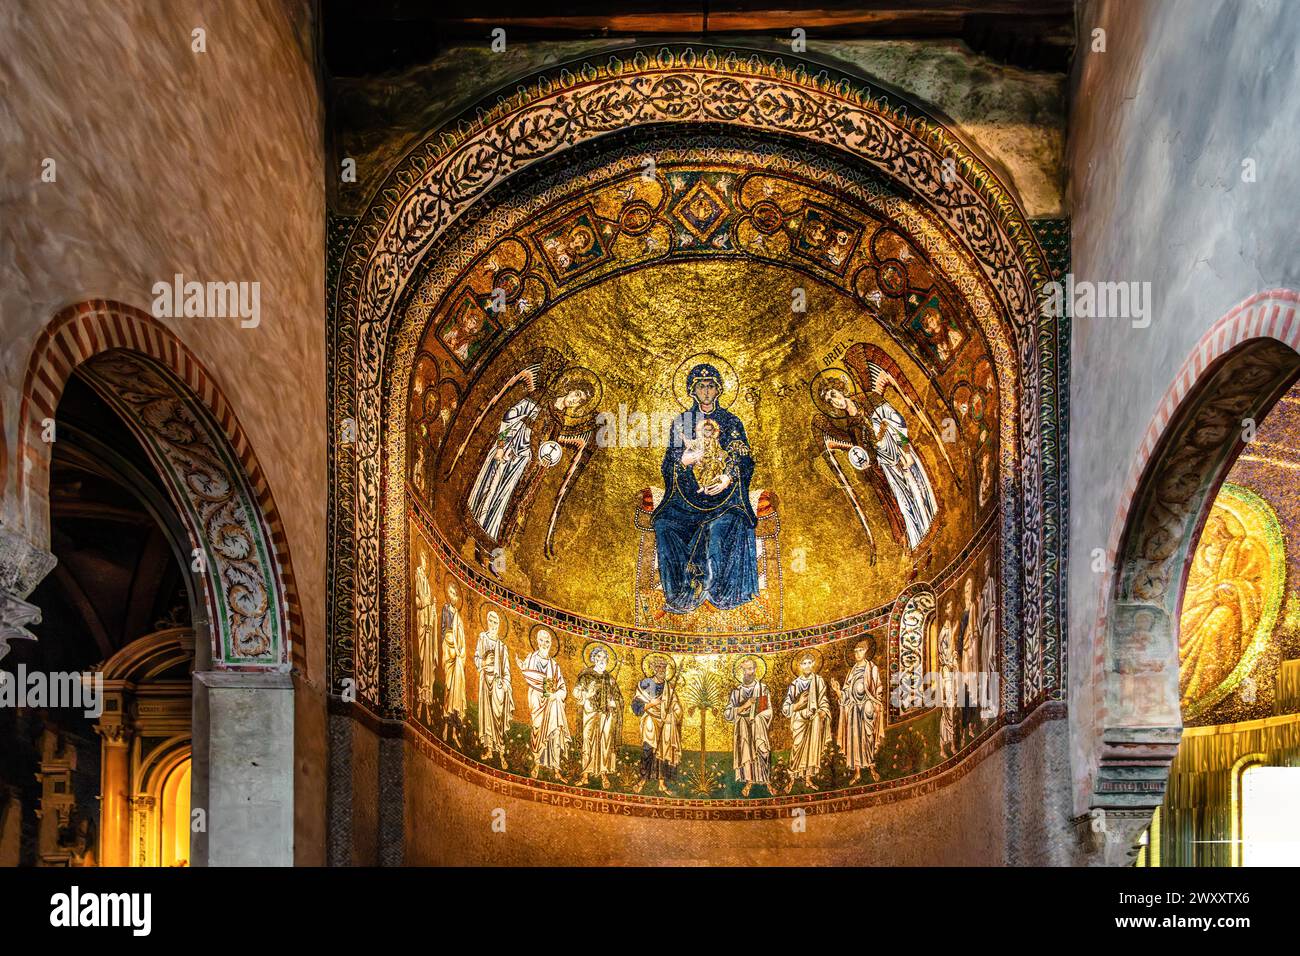 Our Lady between the Archangels Gabriel and Michael and the Apostles, 11th century, Byzantine mosaic, left Abssis, Cathedral of San Giusto, Colle di Stock Photo